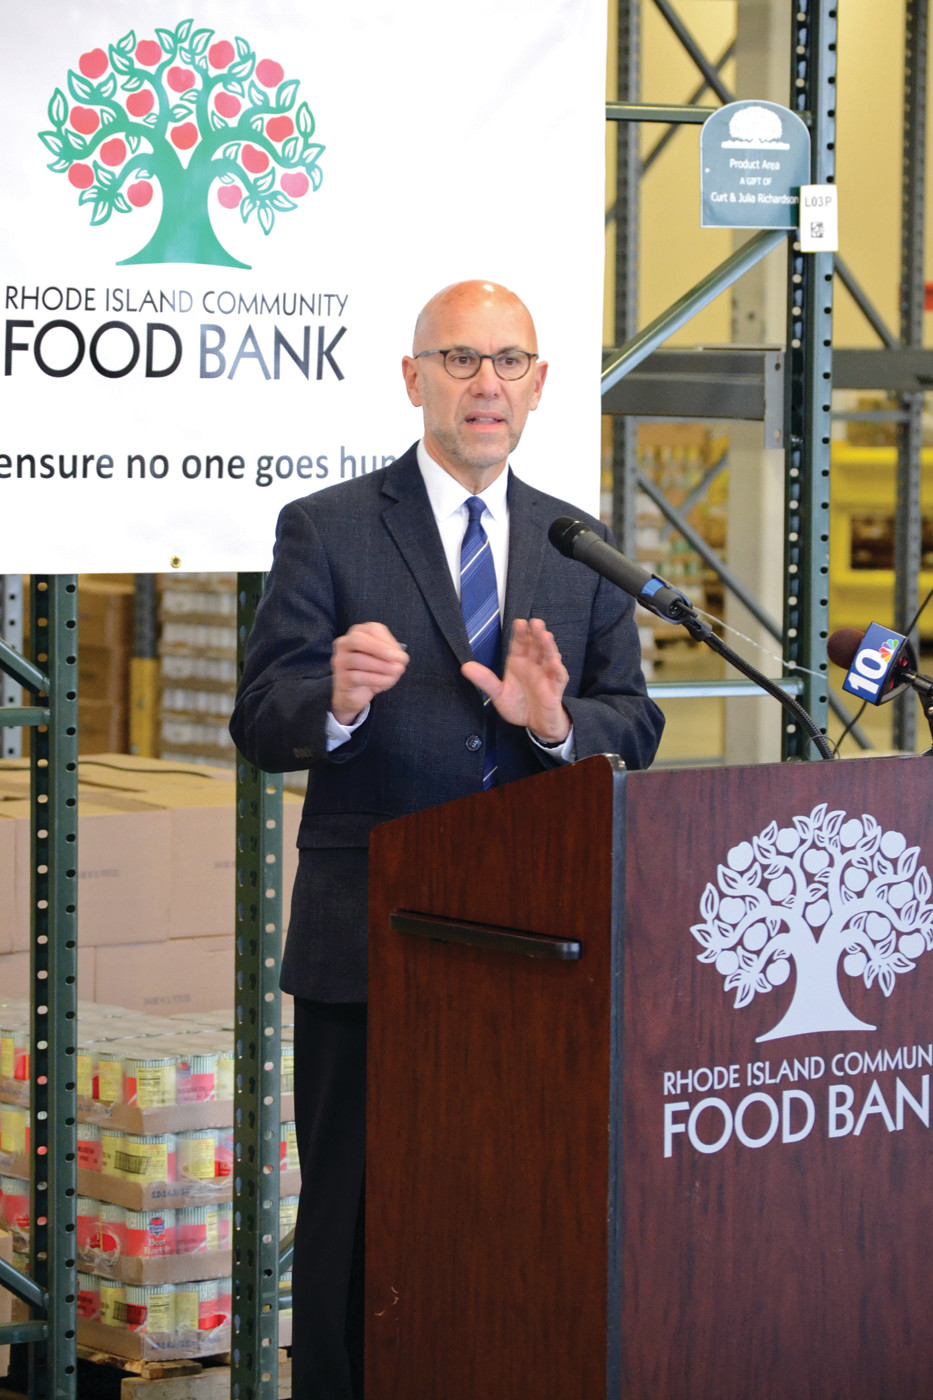 GIVING THE DETAILS: Andrew Schiff, executive director of the Rhode Island Community Food Bank. (Warwick Beacon photo)